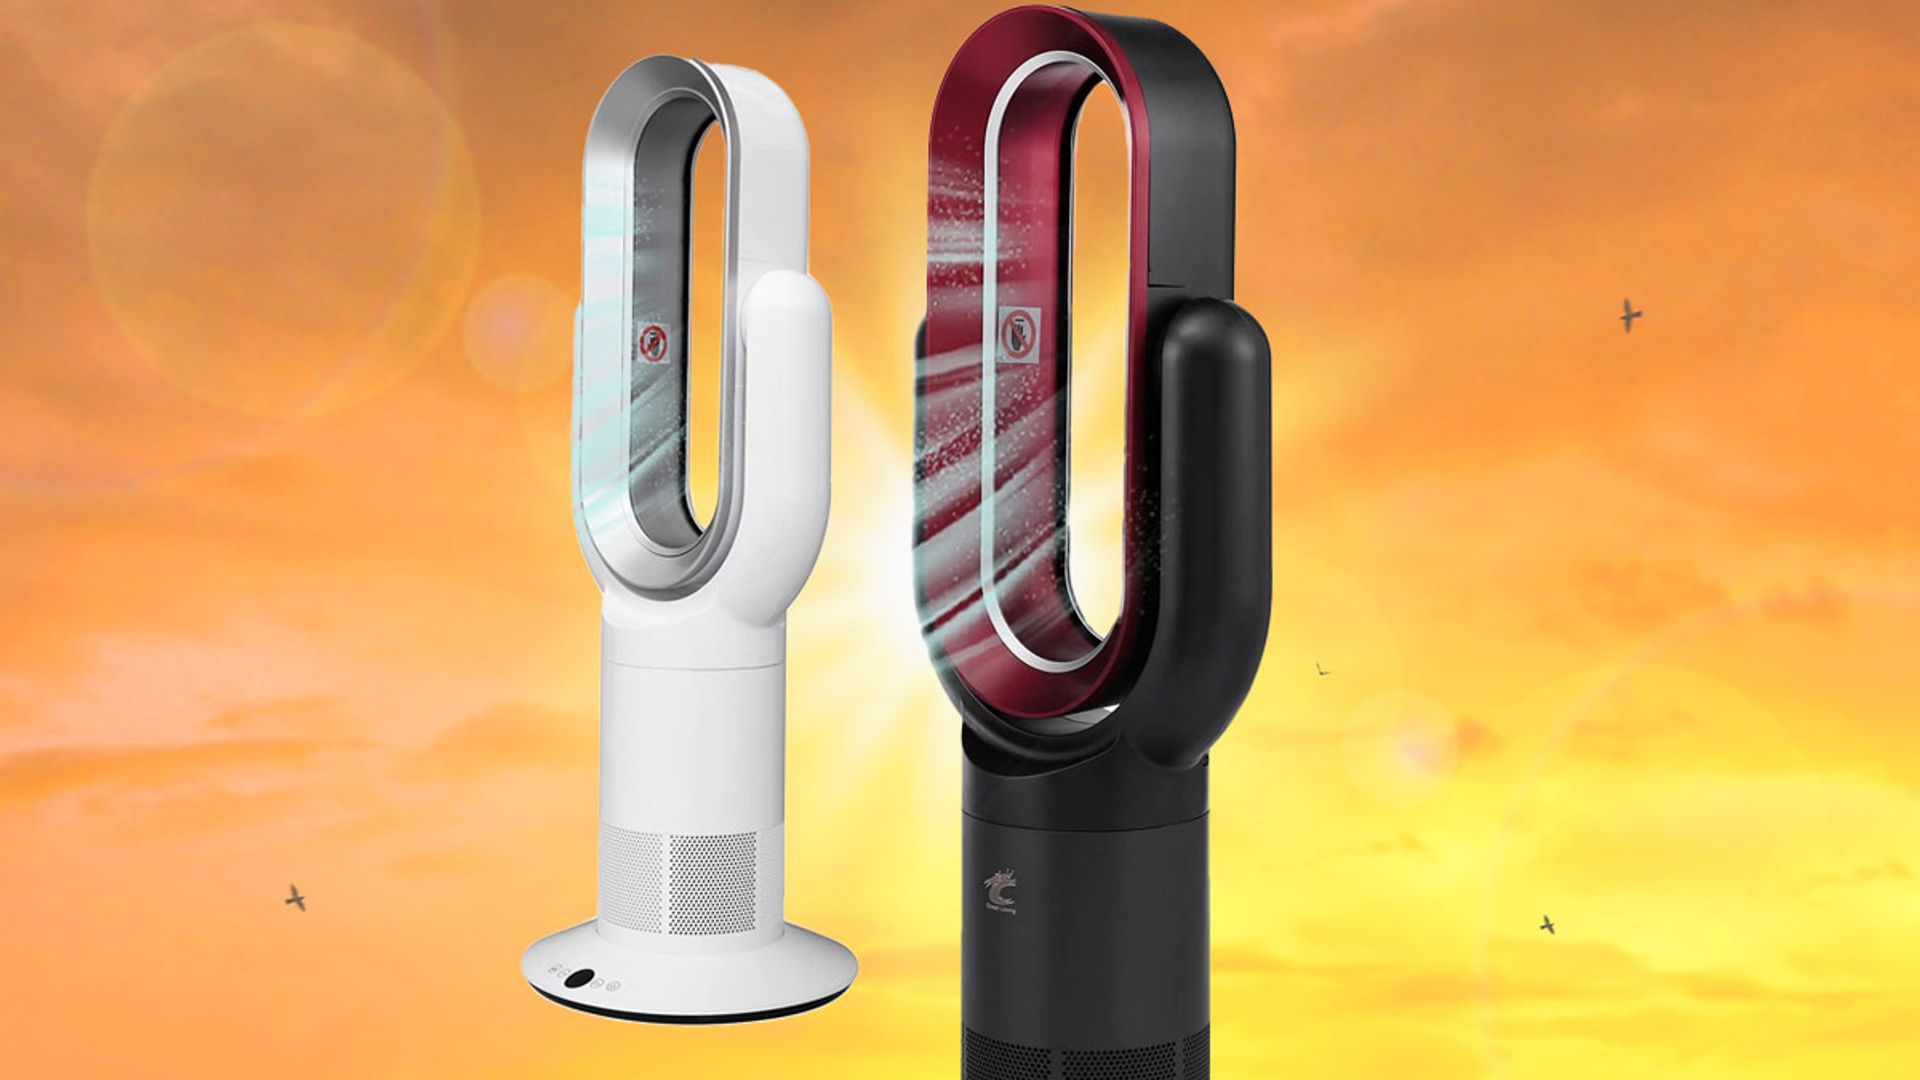 The bladeless fan that shoppers swear is as good as the Dyson but for half the price